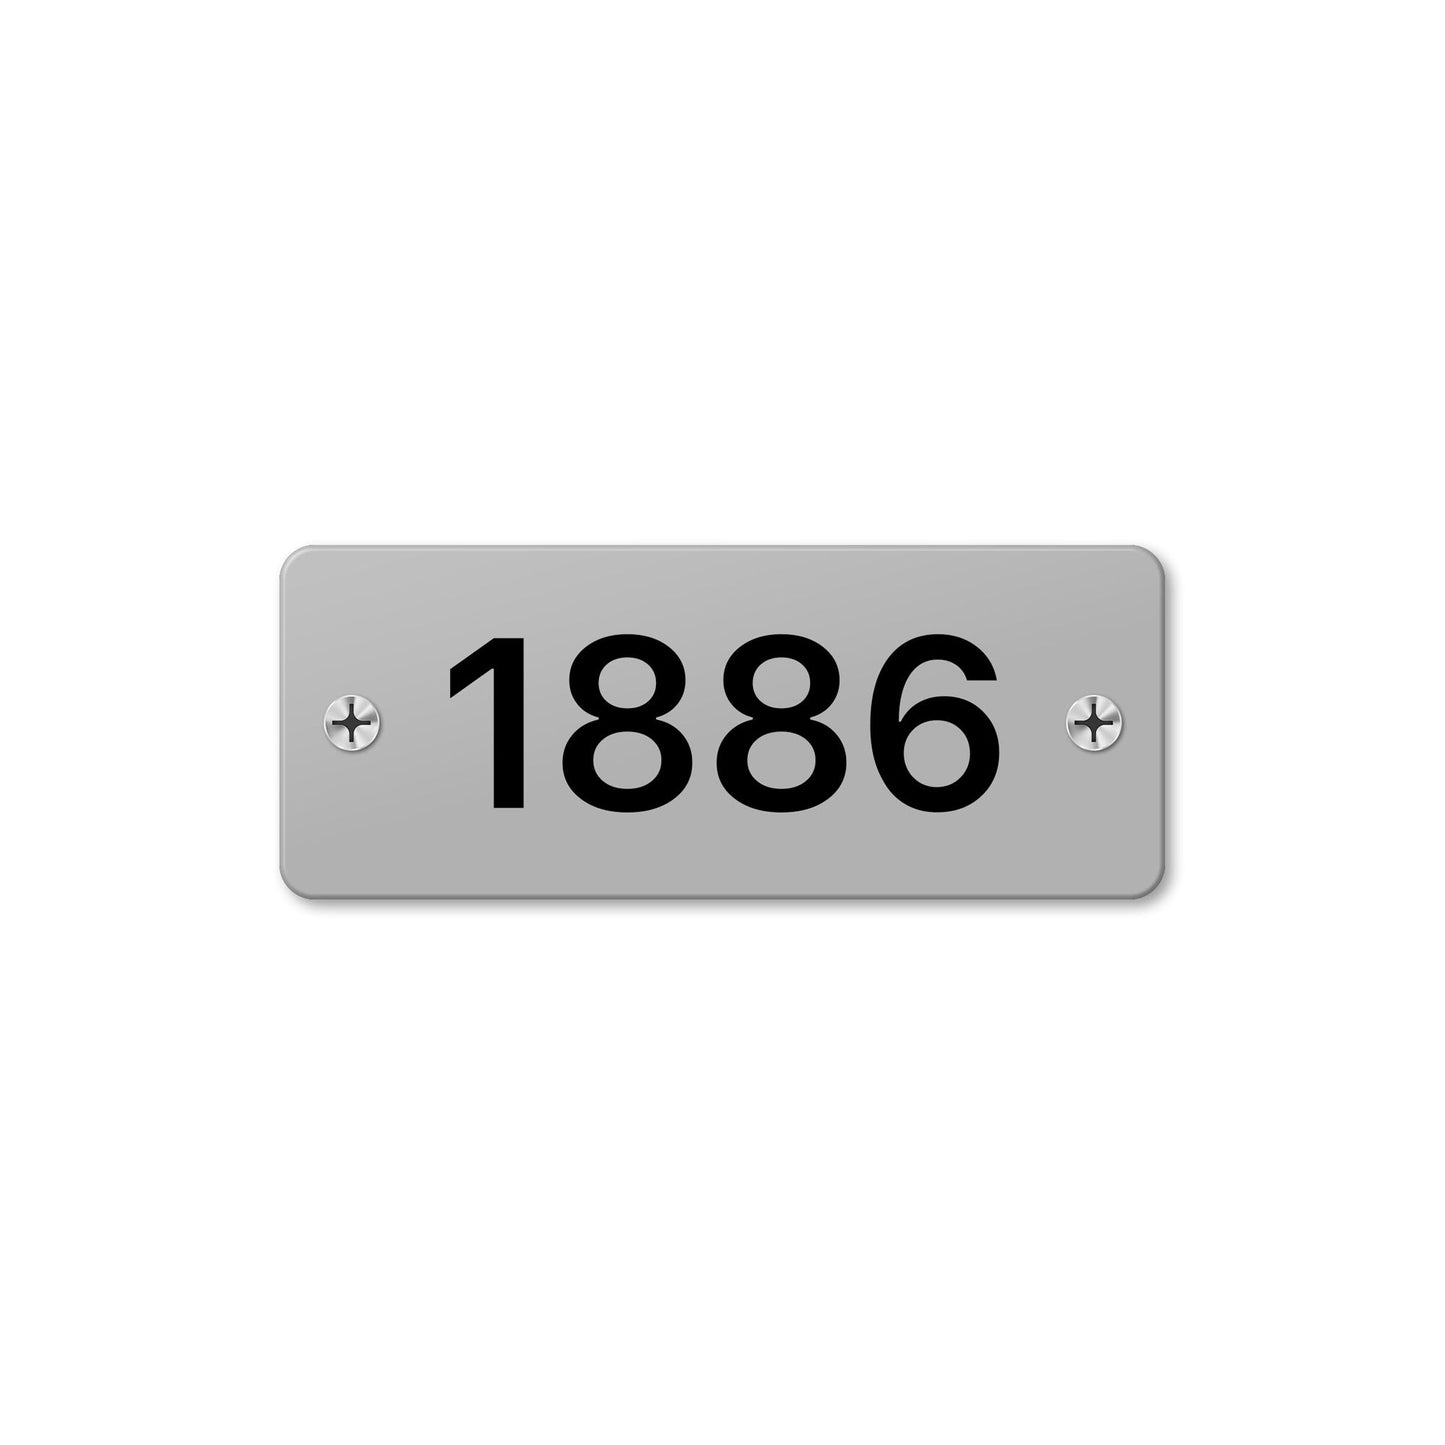 Numeral 1886